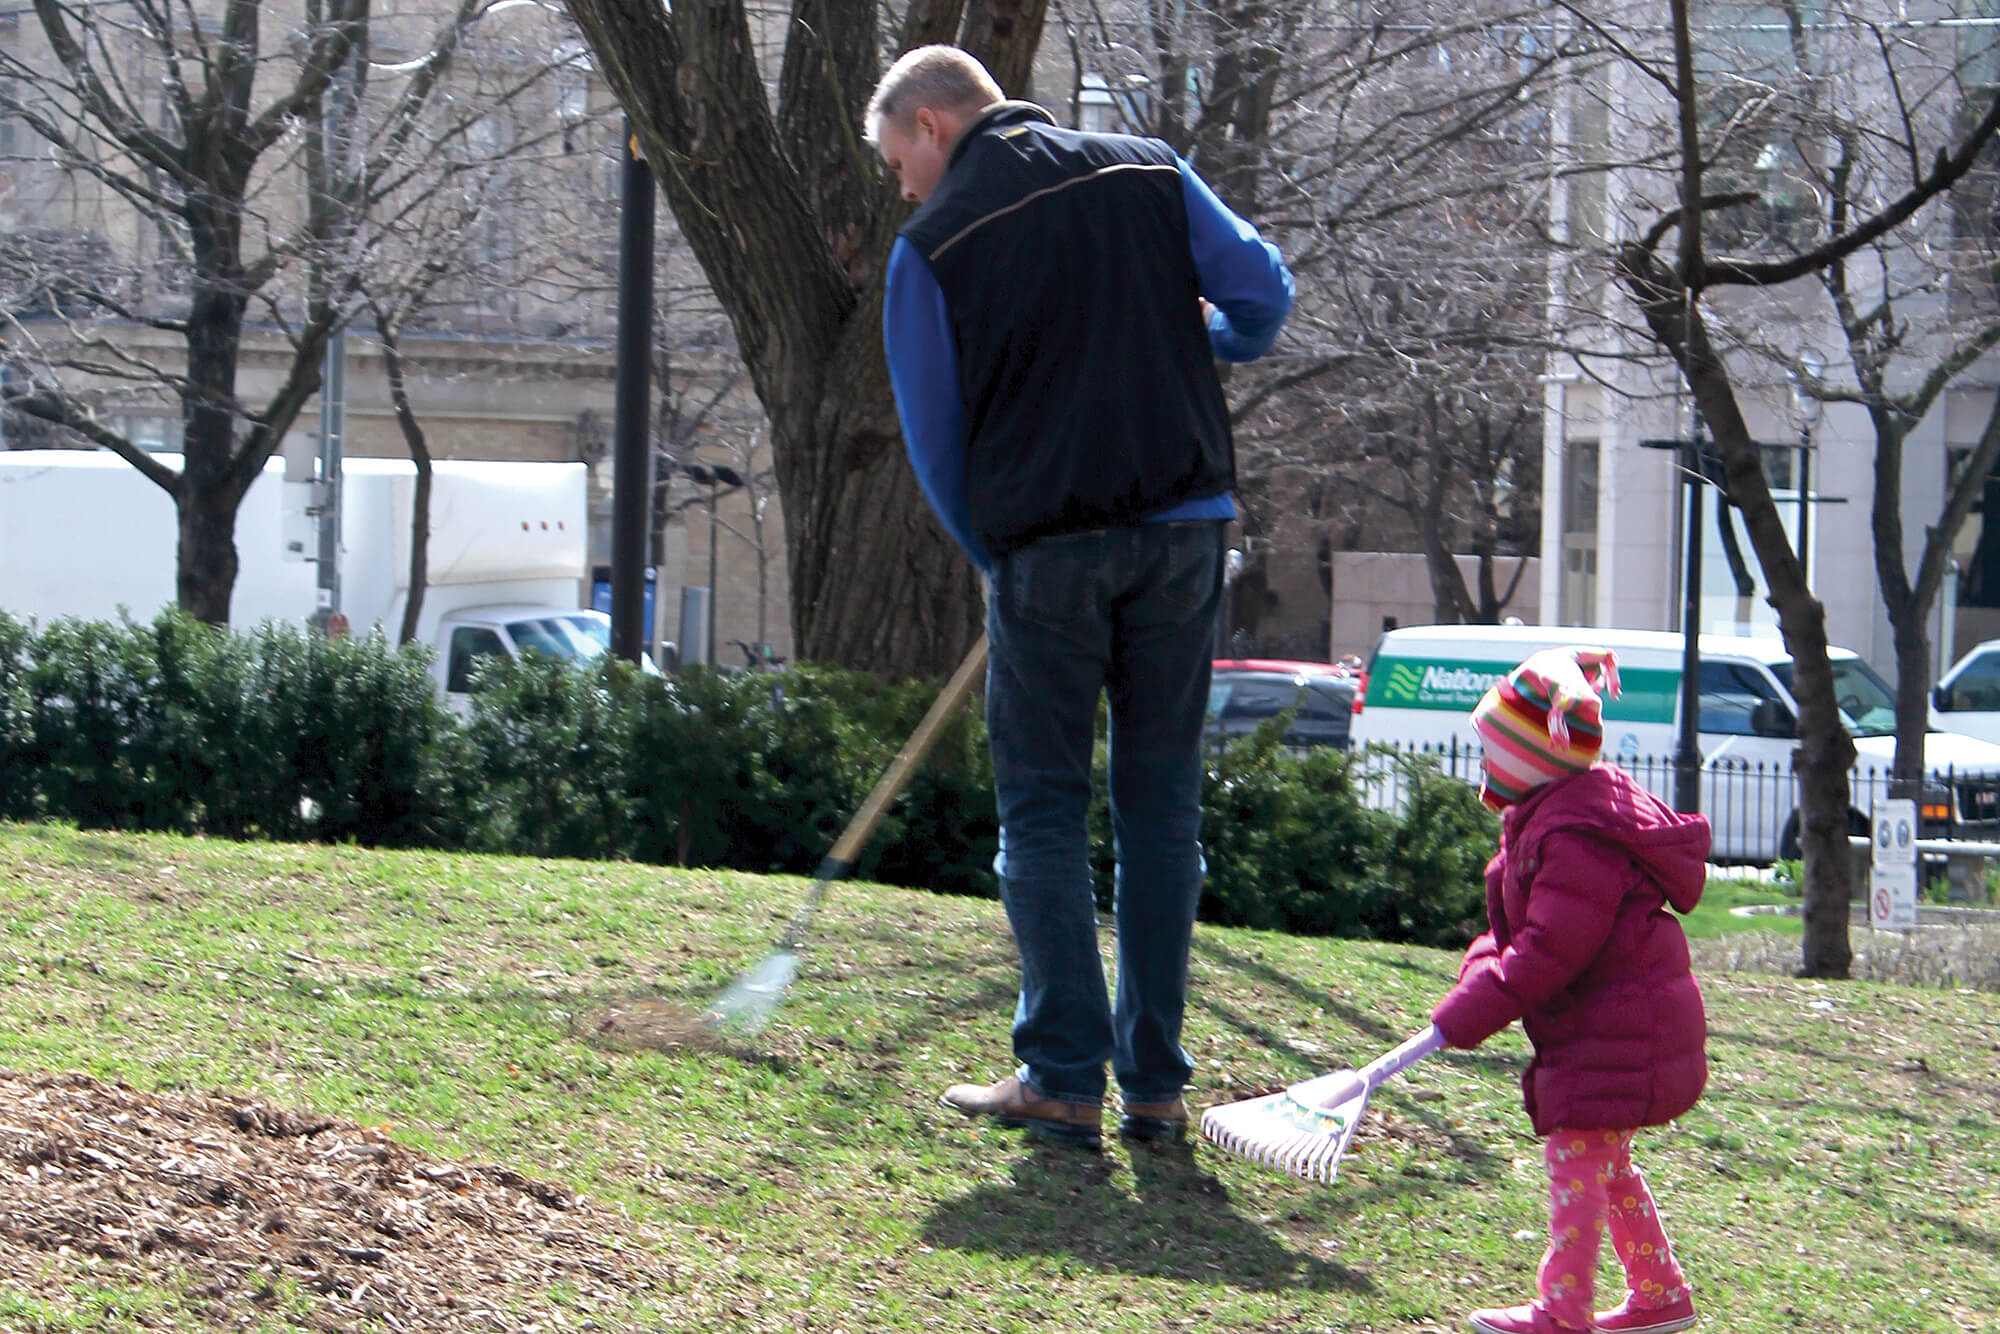 man and young child raking in a park